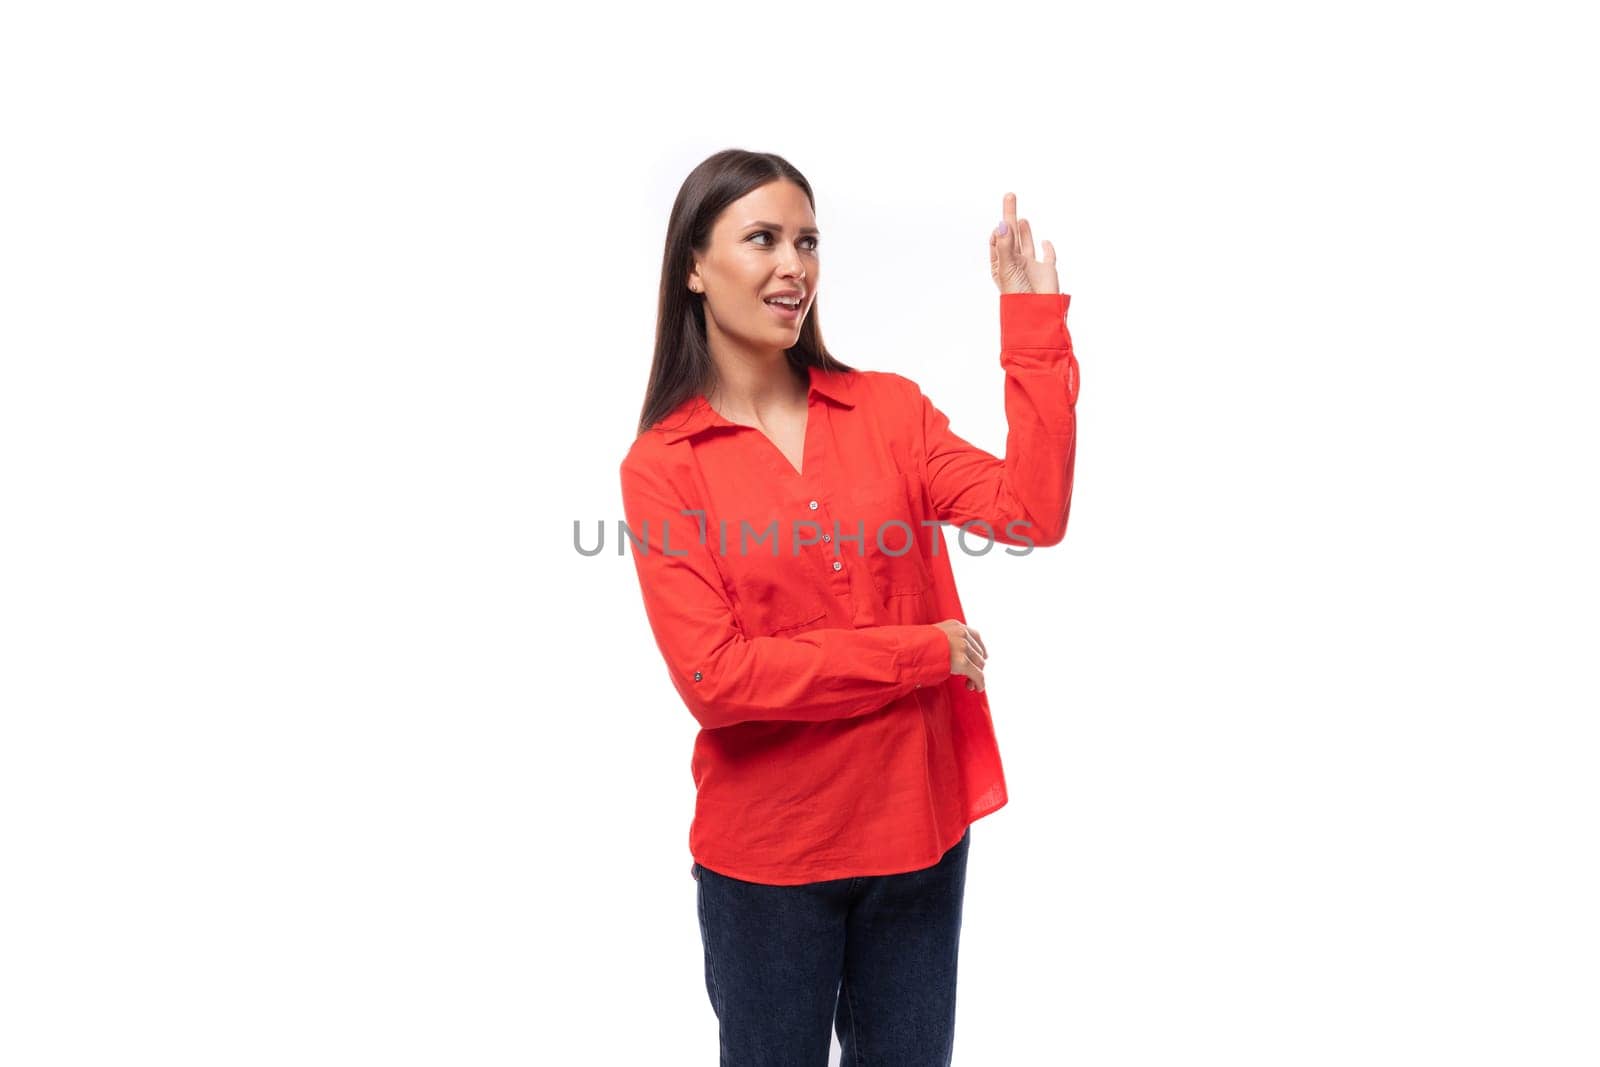 young pretty brunette caucasian model woman dressed in fashionable red shirt tells interesting news on white background.